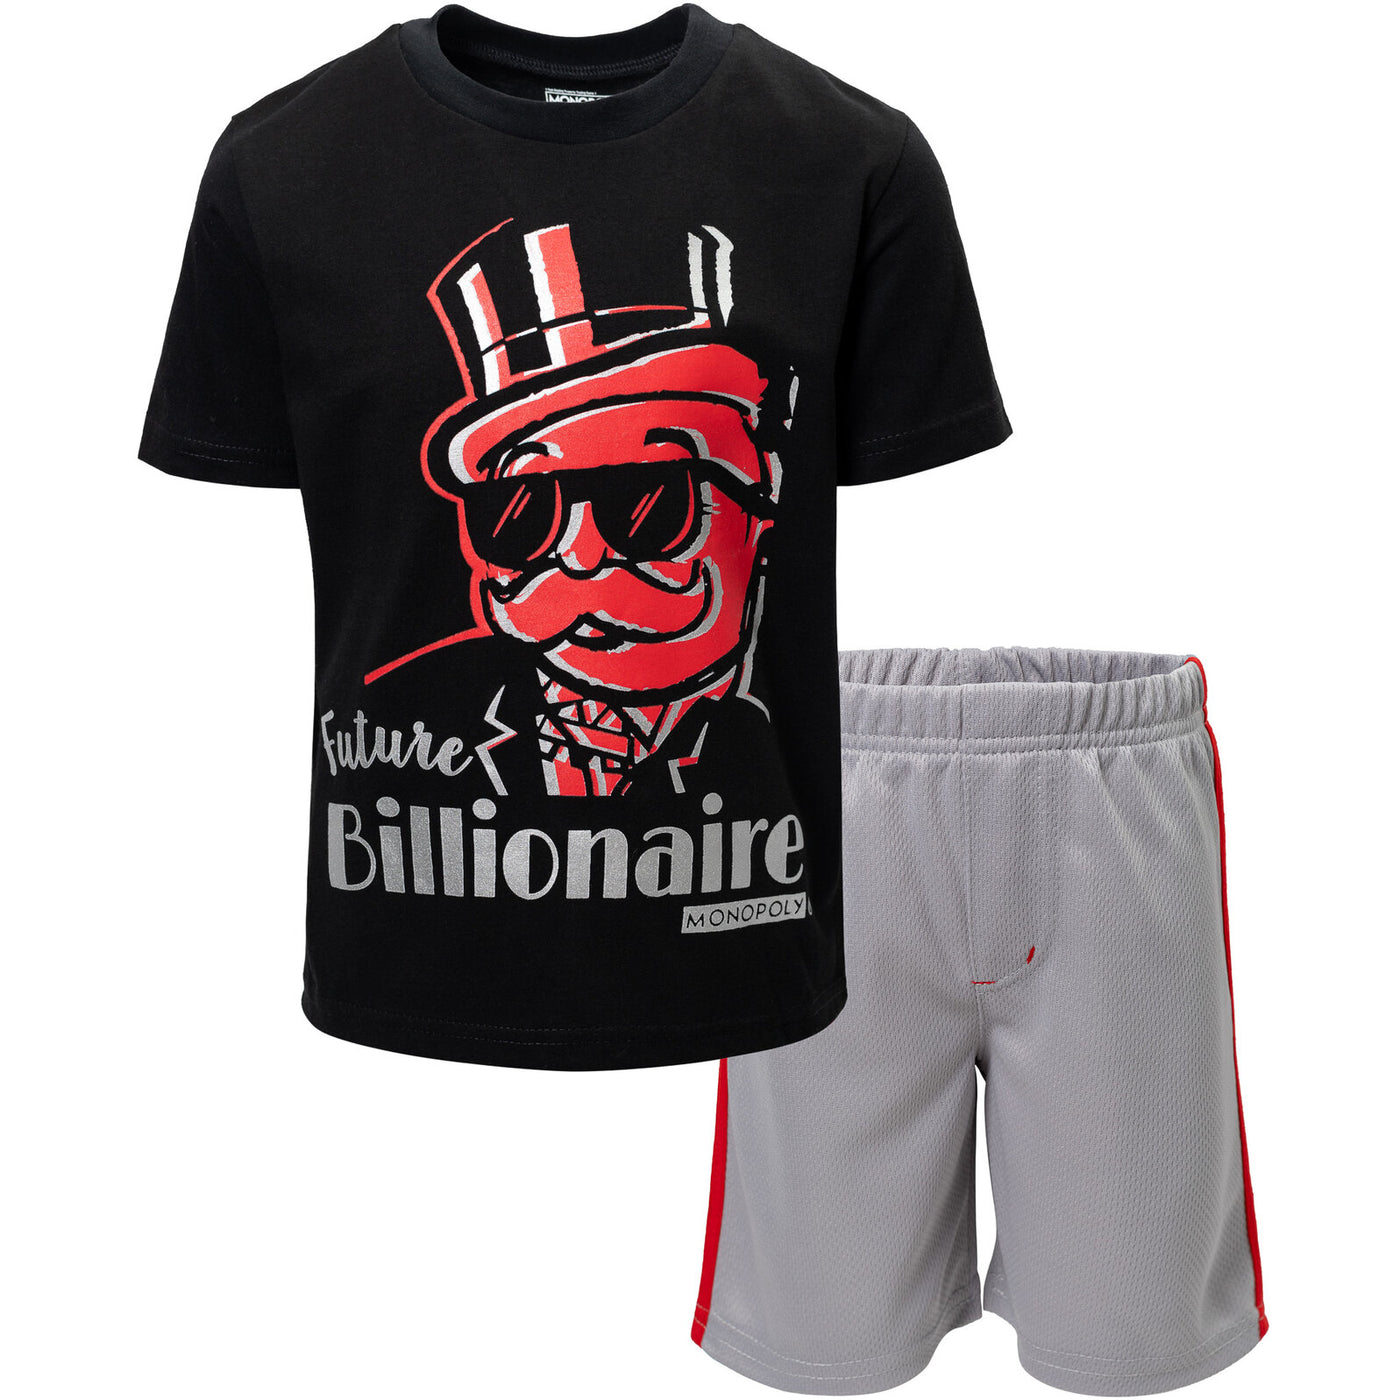 MONOPOLY Athletic Pullover T-Shirt Mesh Shorts Outfit Set